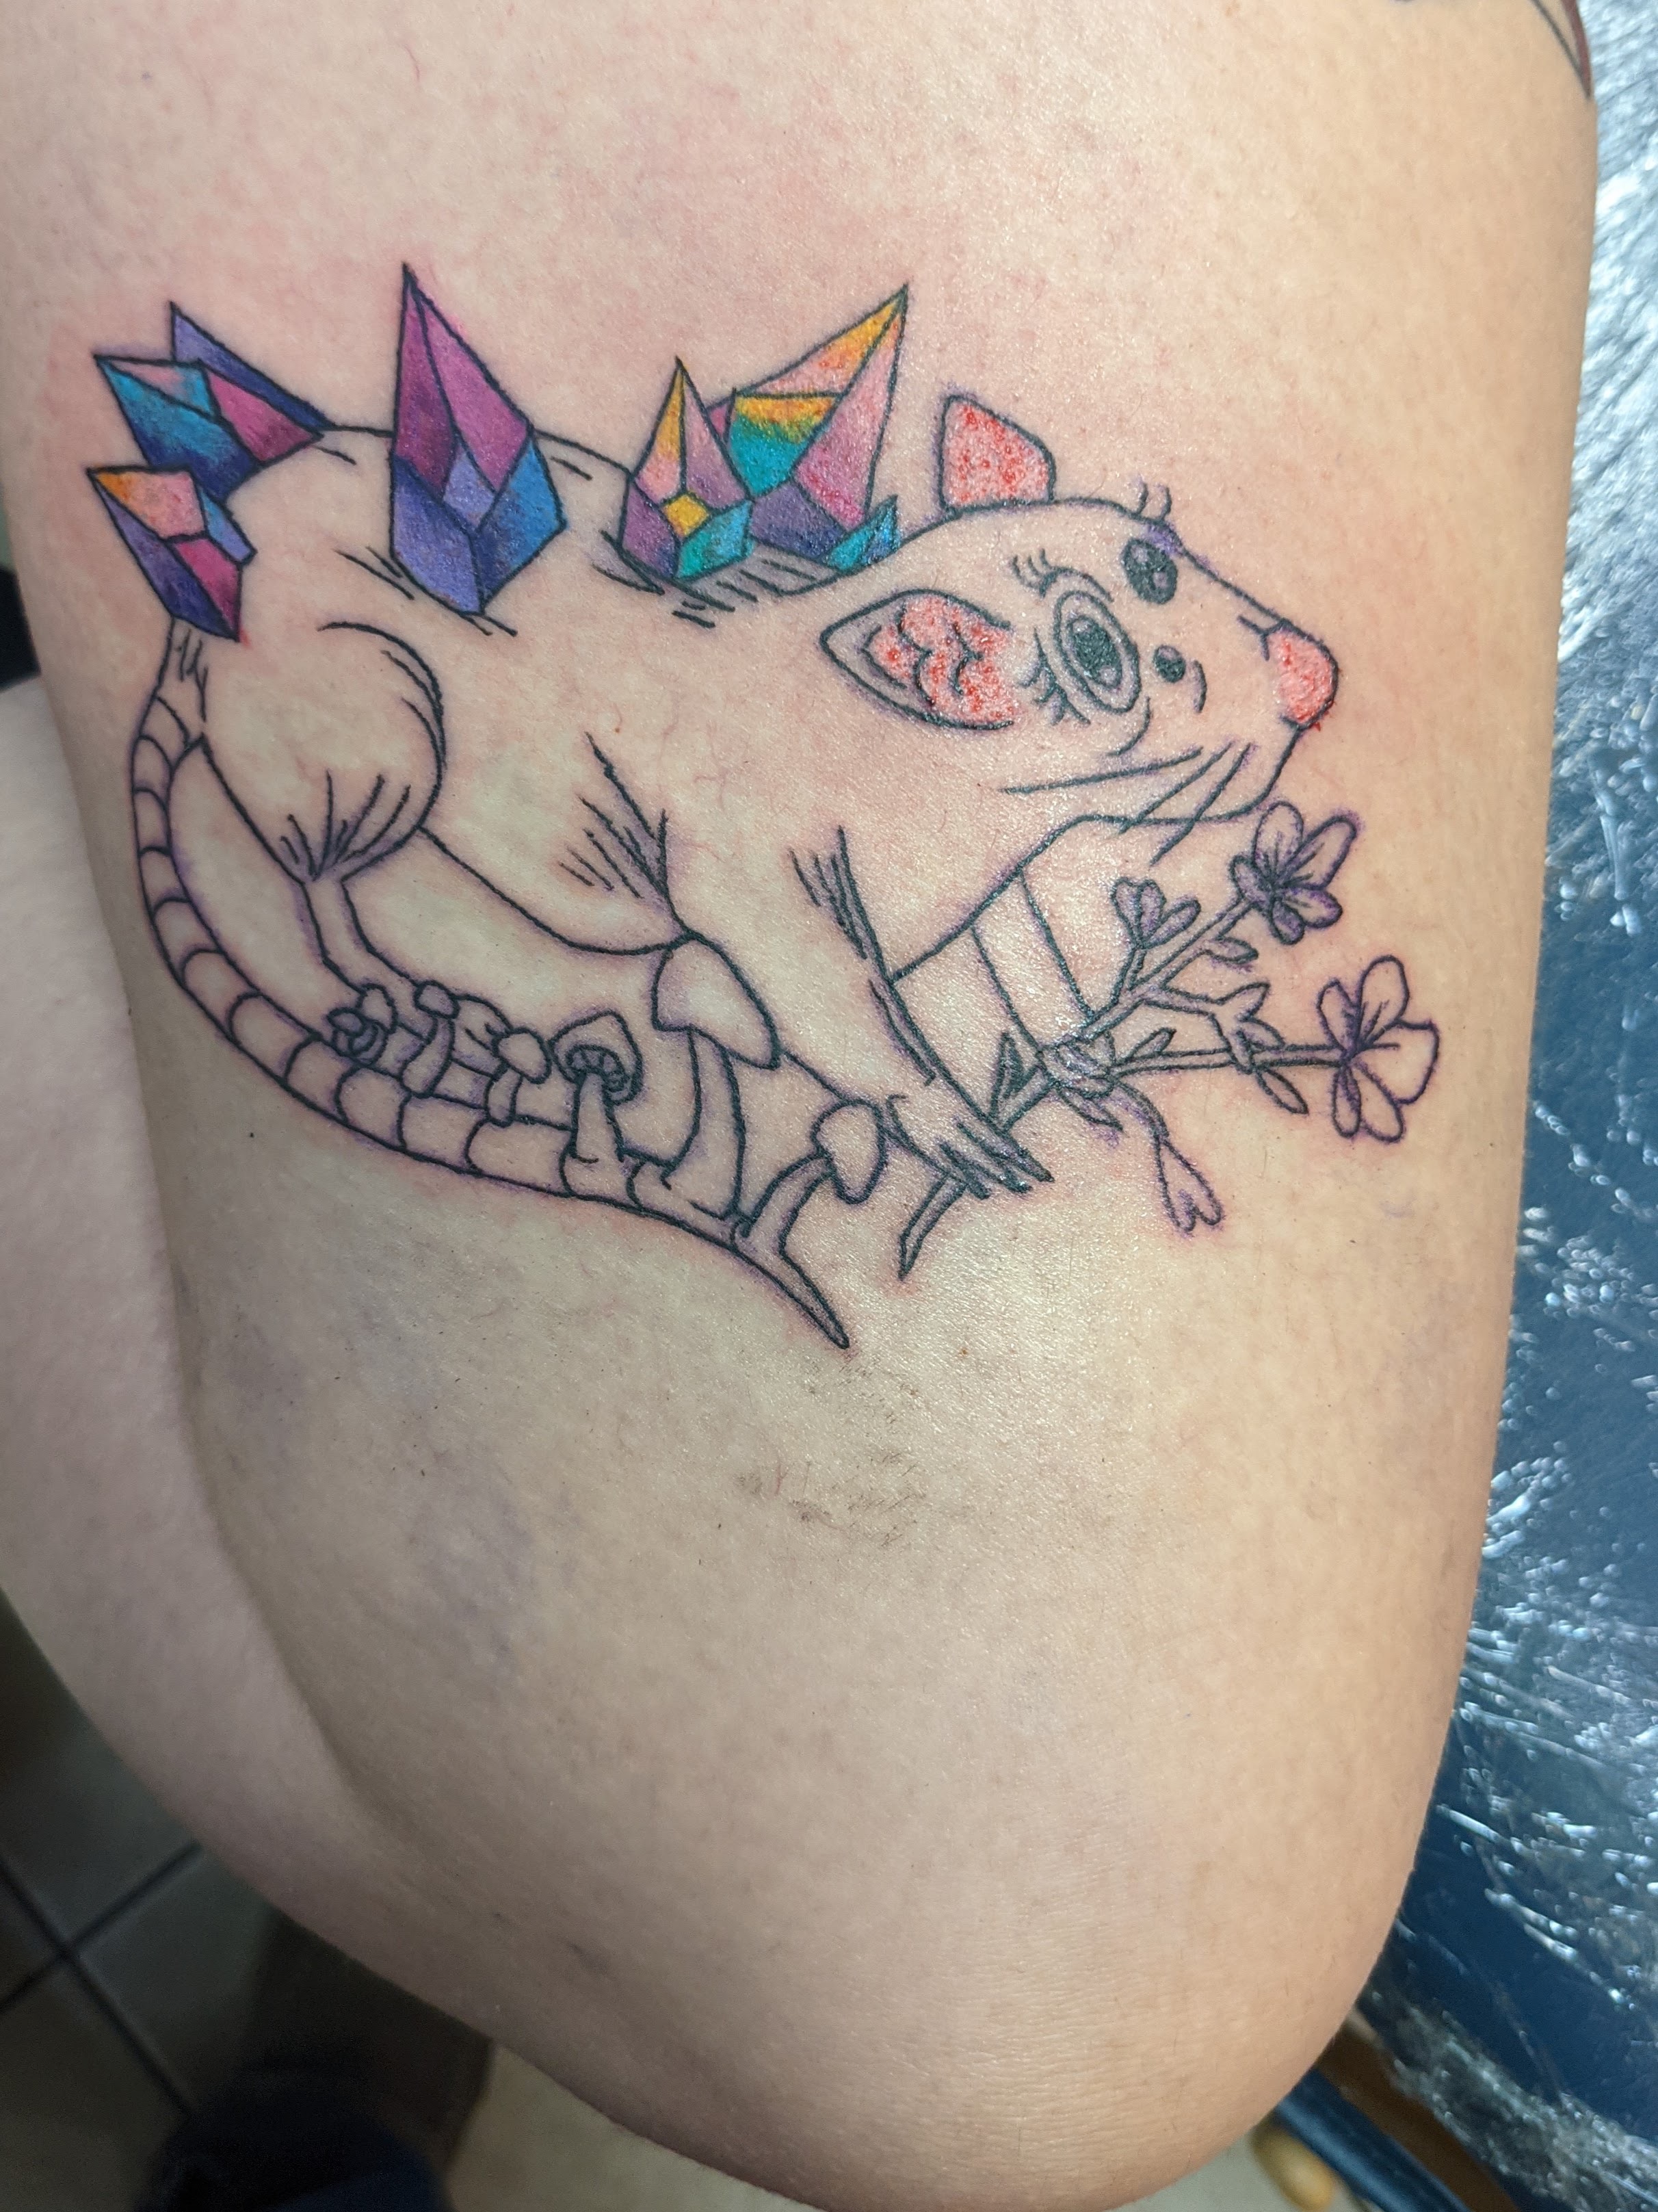 Tattoo of a Rat with Crystals, Mushrooms and Flowers on a thigh